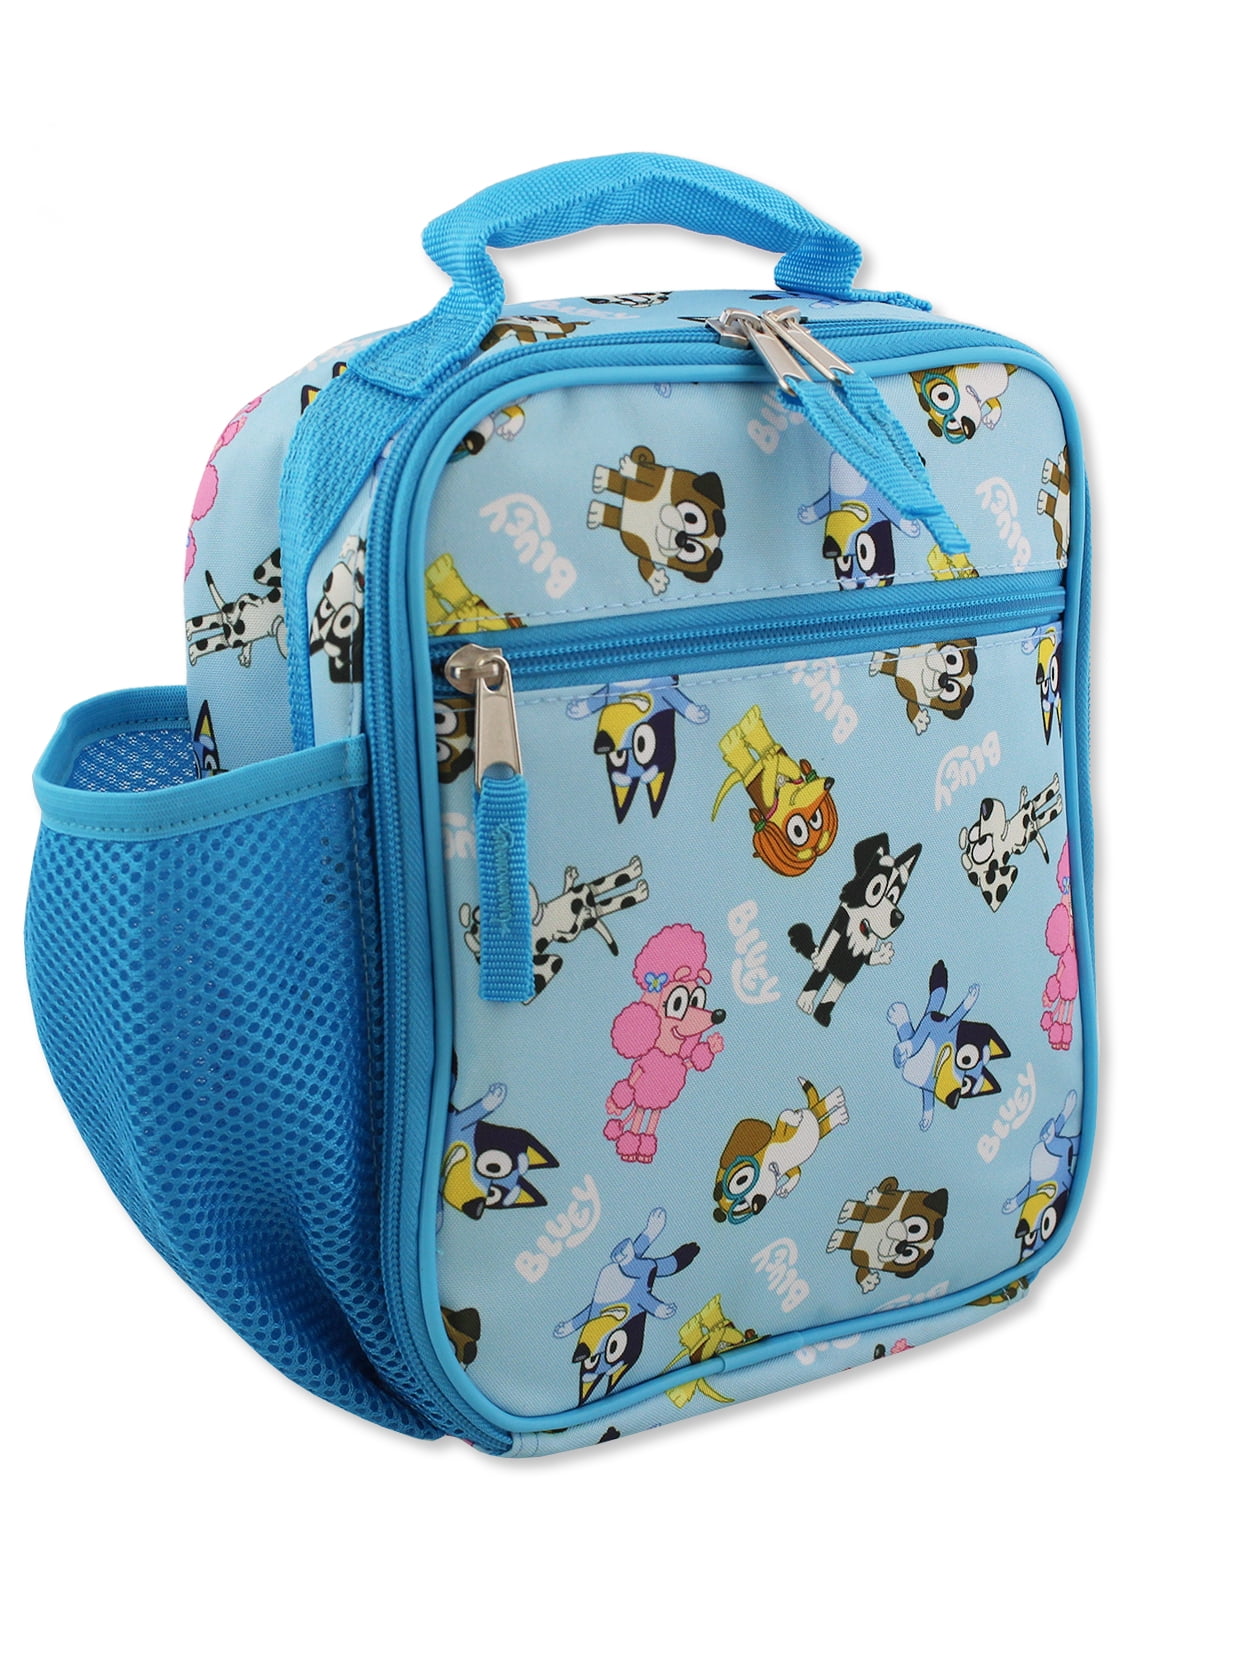 Bluey Lunch Box 3 Piece Set with Insulated Lunch Bag Snack Box BPA Fre